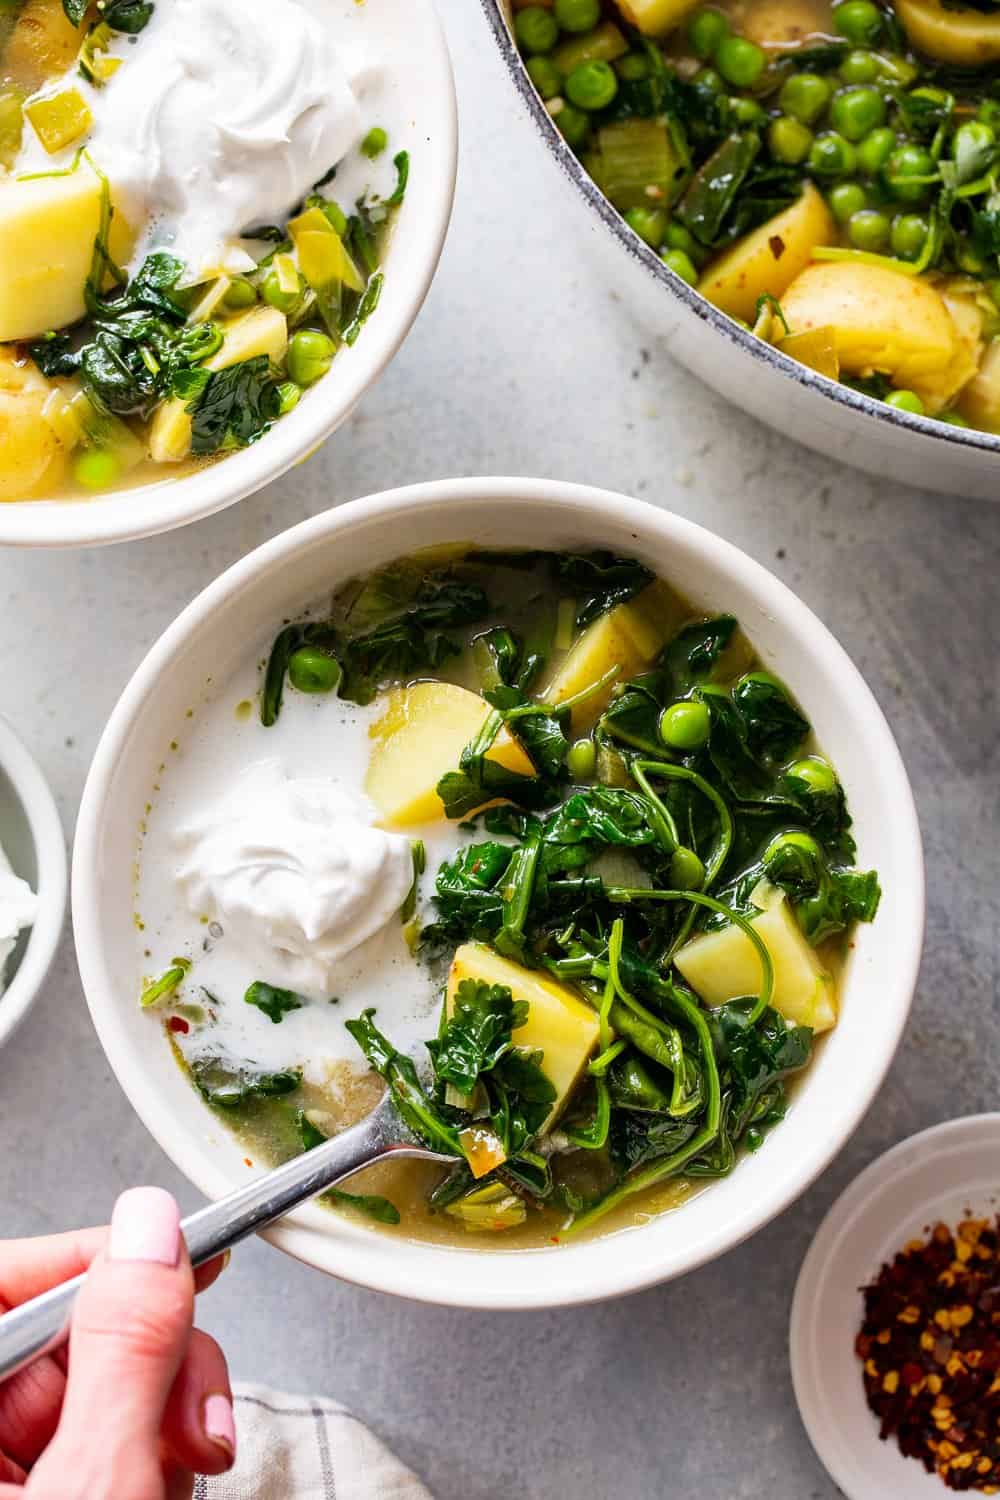 This chunky spring greens soup is full of flavor, good fats and healthy carbs. Golden potatoes, peas, spring veggies and an easy homemade dairy free sour cream make it hearty, healthy and so delicious. #paleo #whole30 #cleaneating